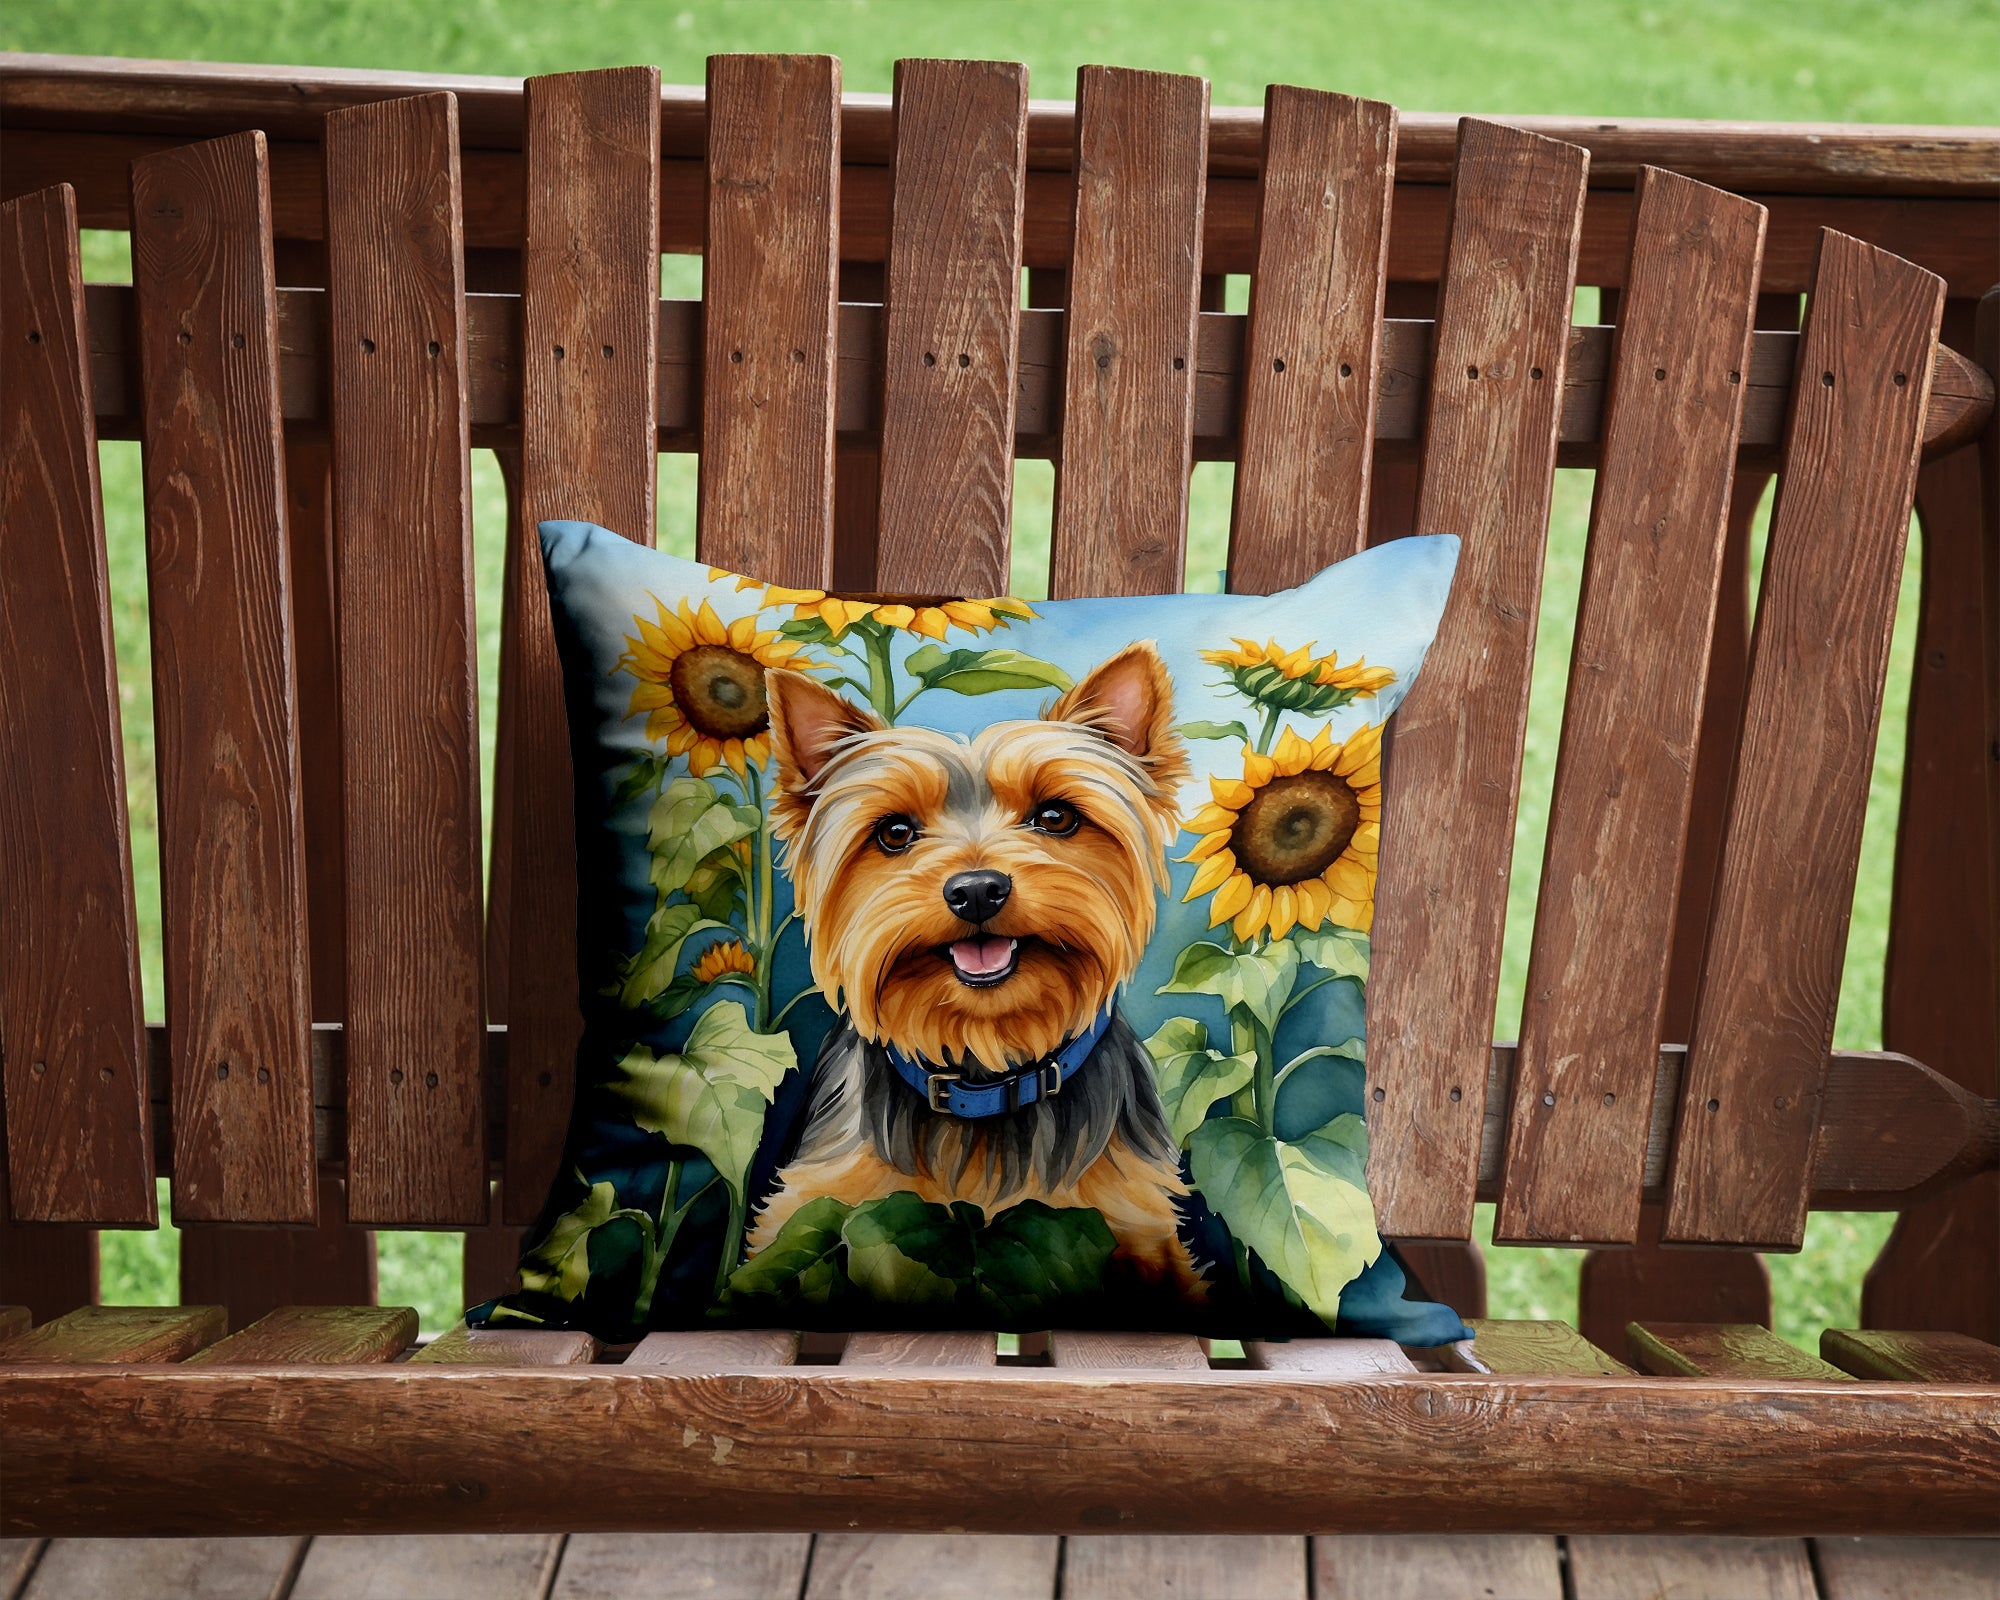 Buy this Silky Terrier in Sunflowers Throw Pillow